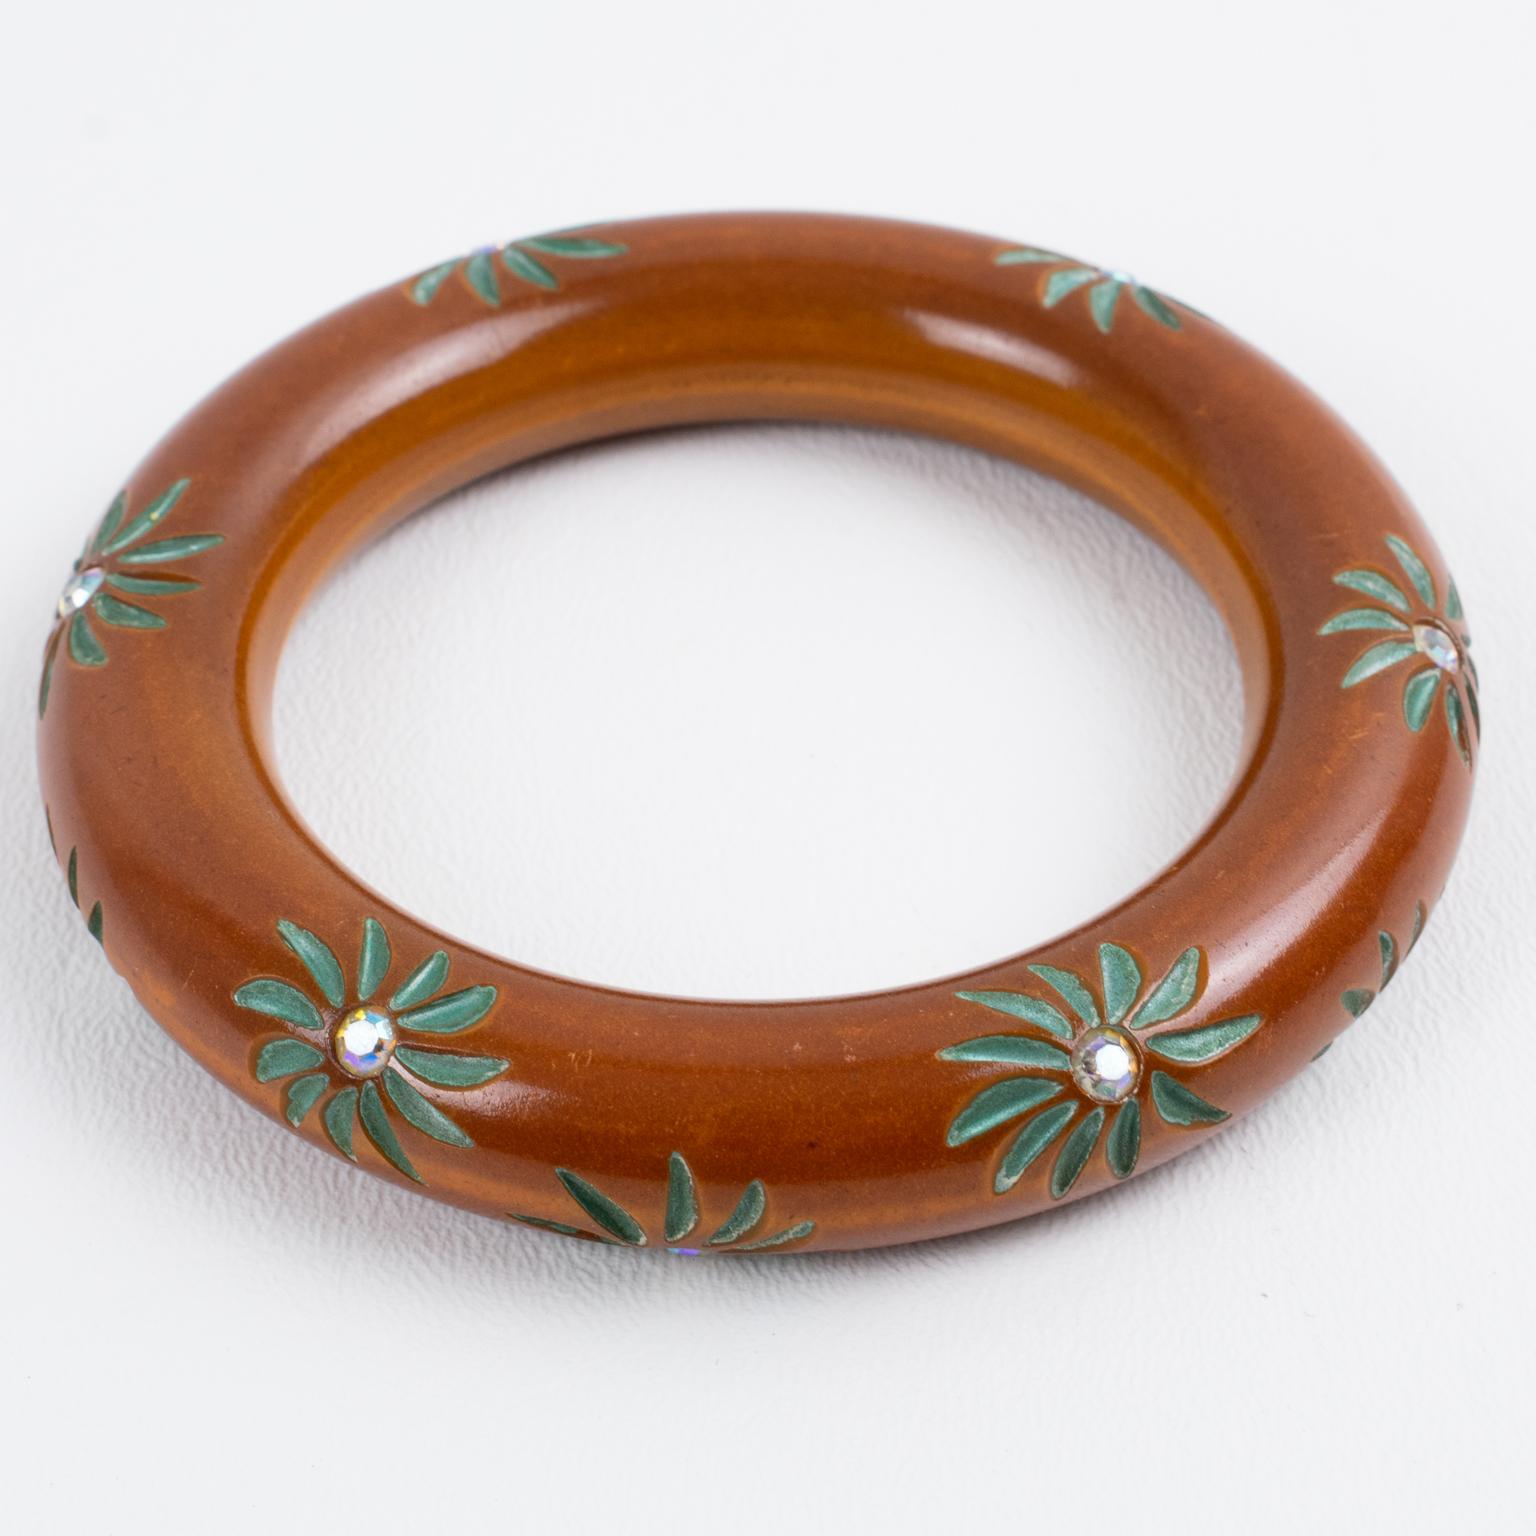 This stunning cinnamon-brown Bakelite bracelet bangle has a chunky, rounded domed shape and floral carving around it. The carved floral design is enhanced with contrasting green paint and AB crystal rhinestones. The piece boasts an intense